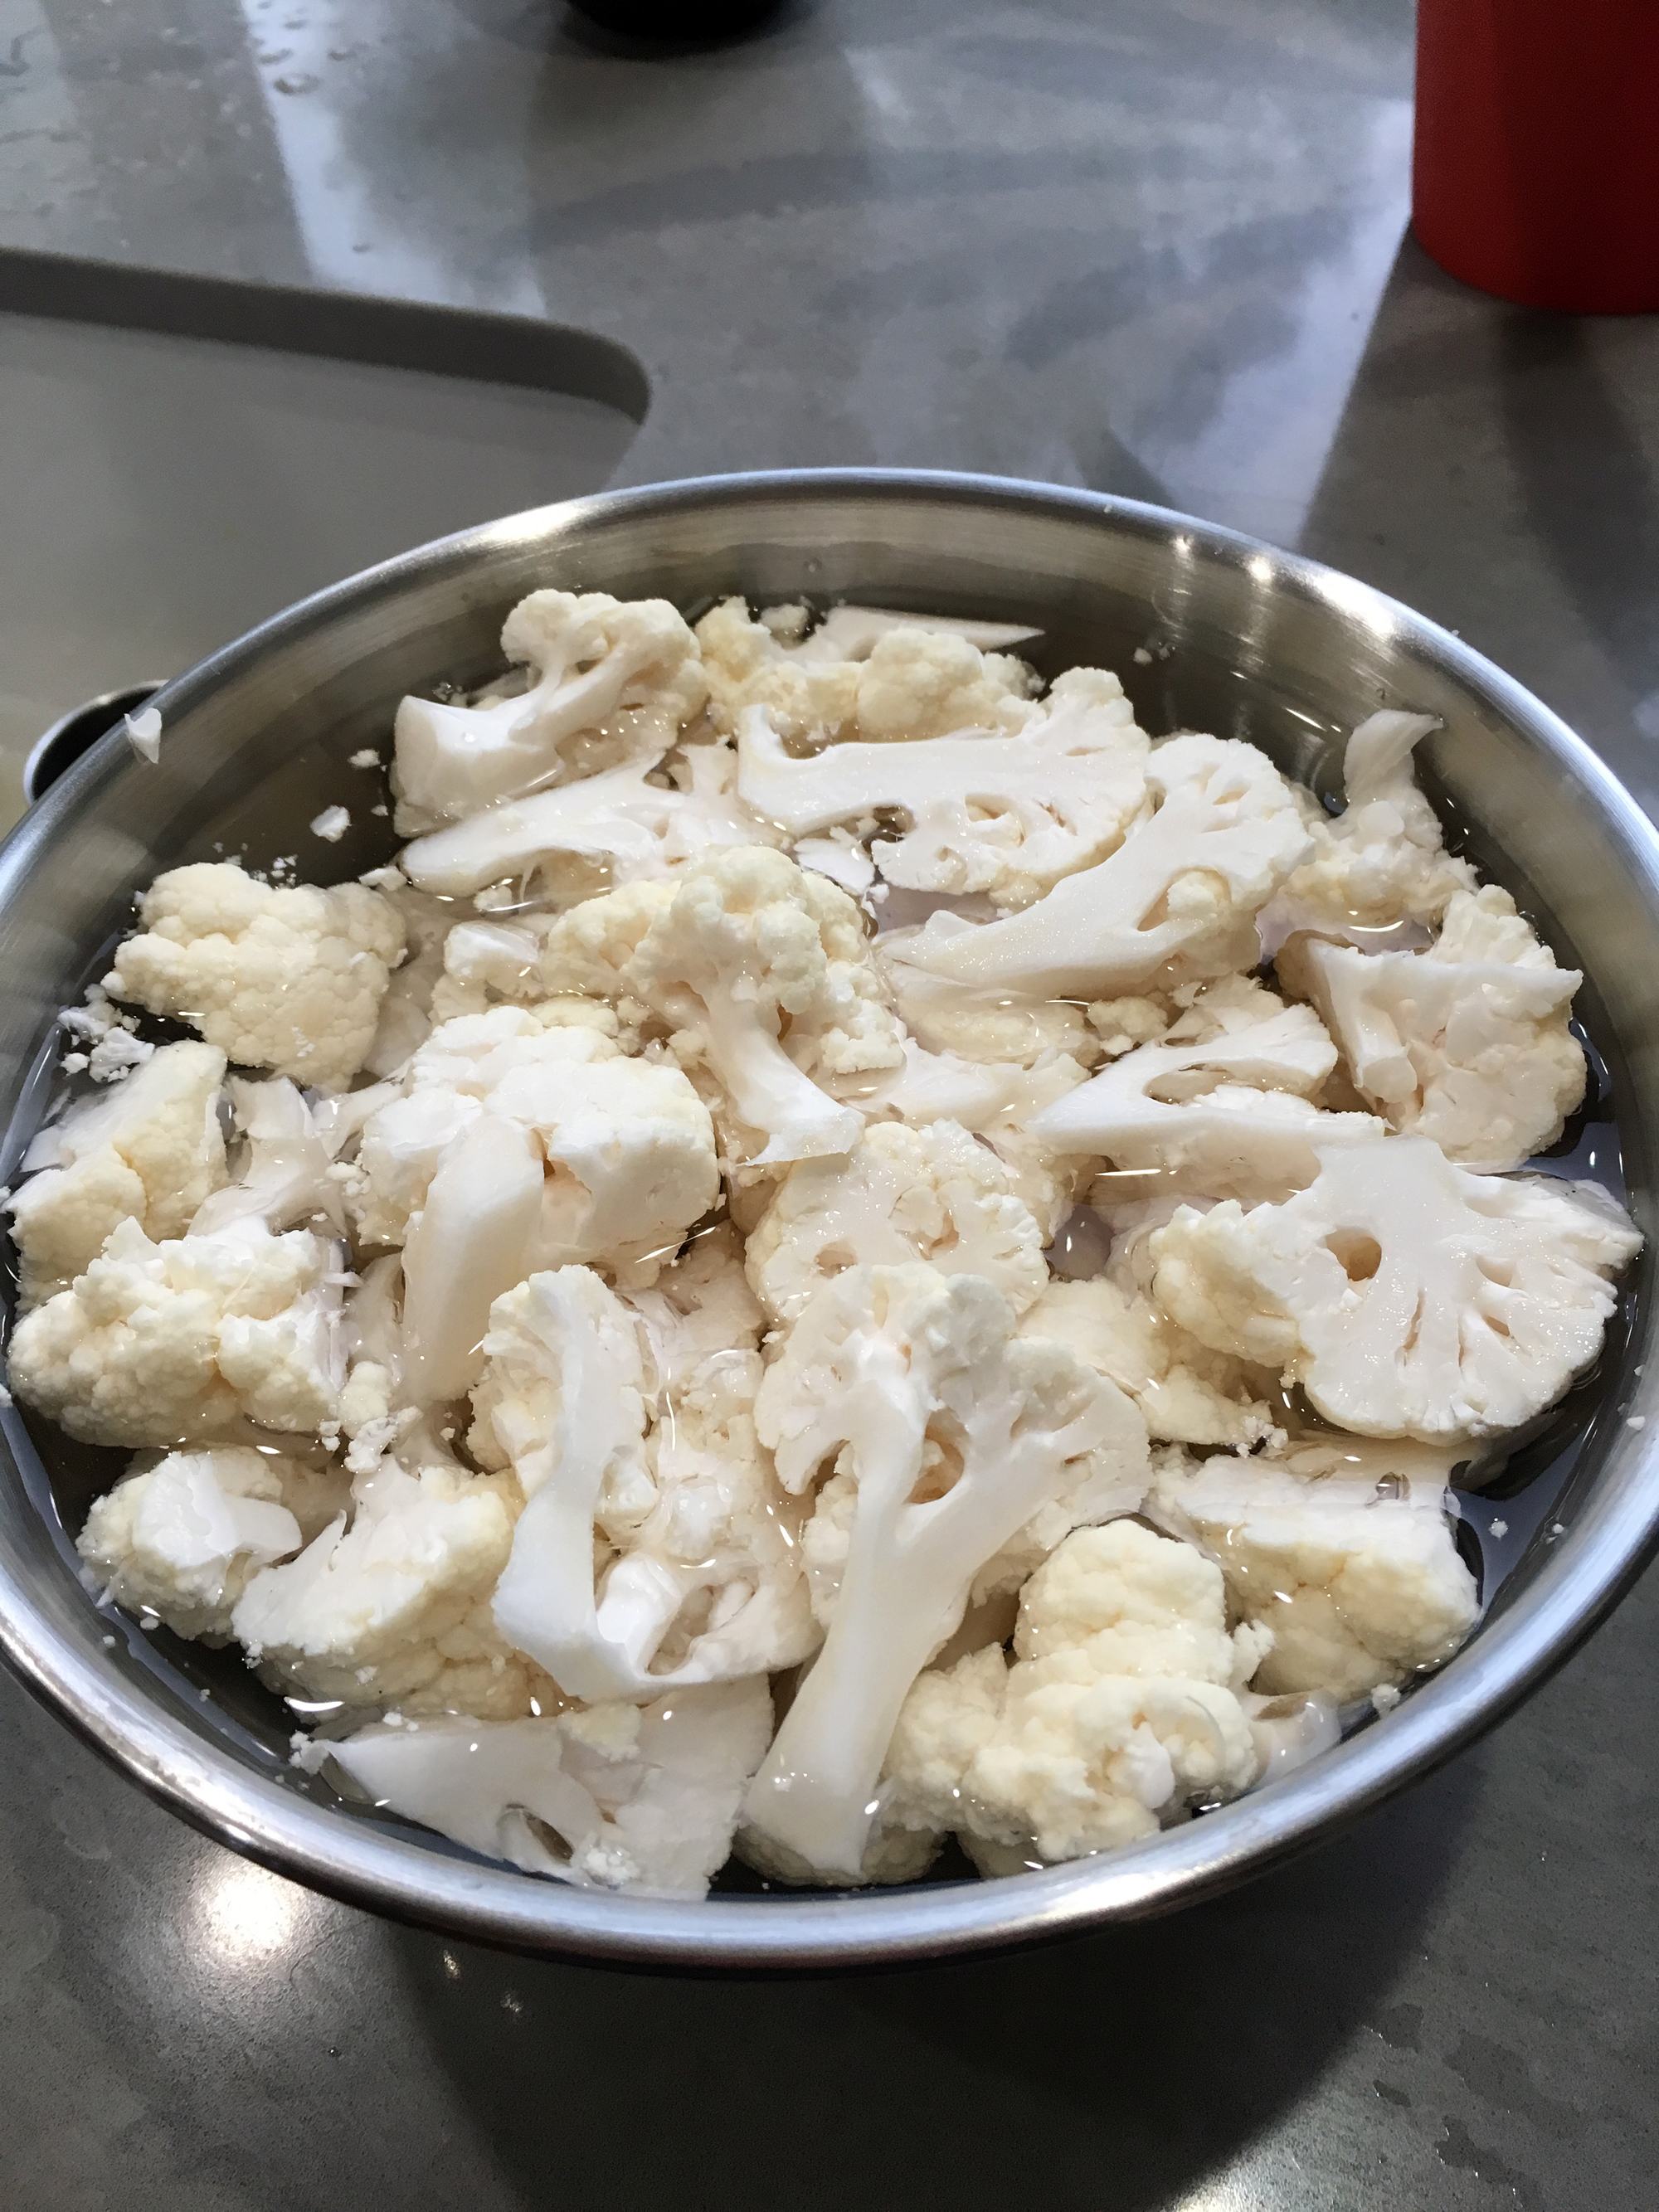 Soak the cauliflower in cold water to cover for about 30 minutes. Drain and set aside.